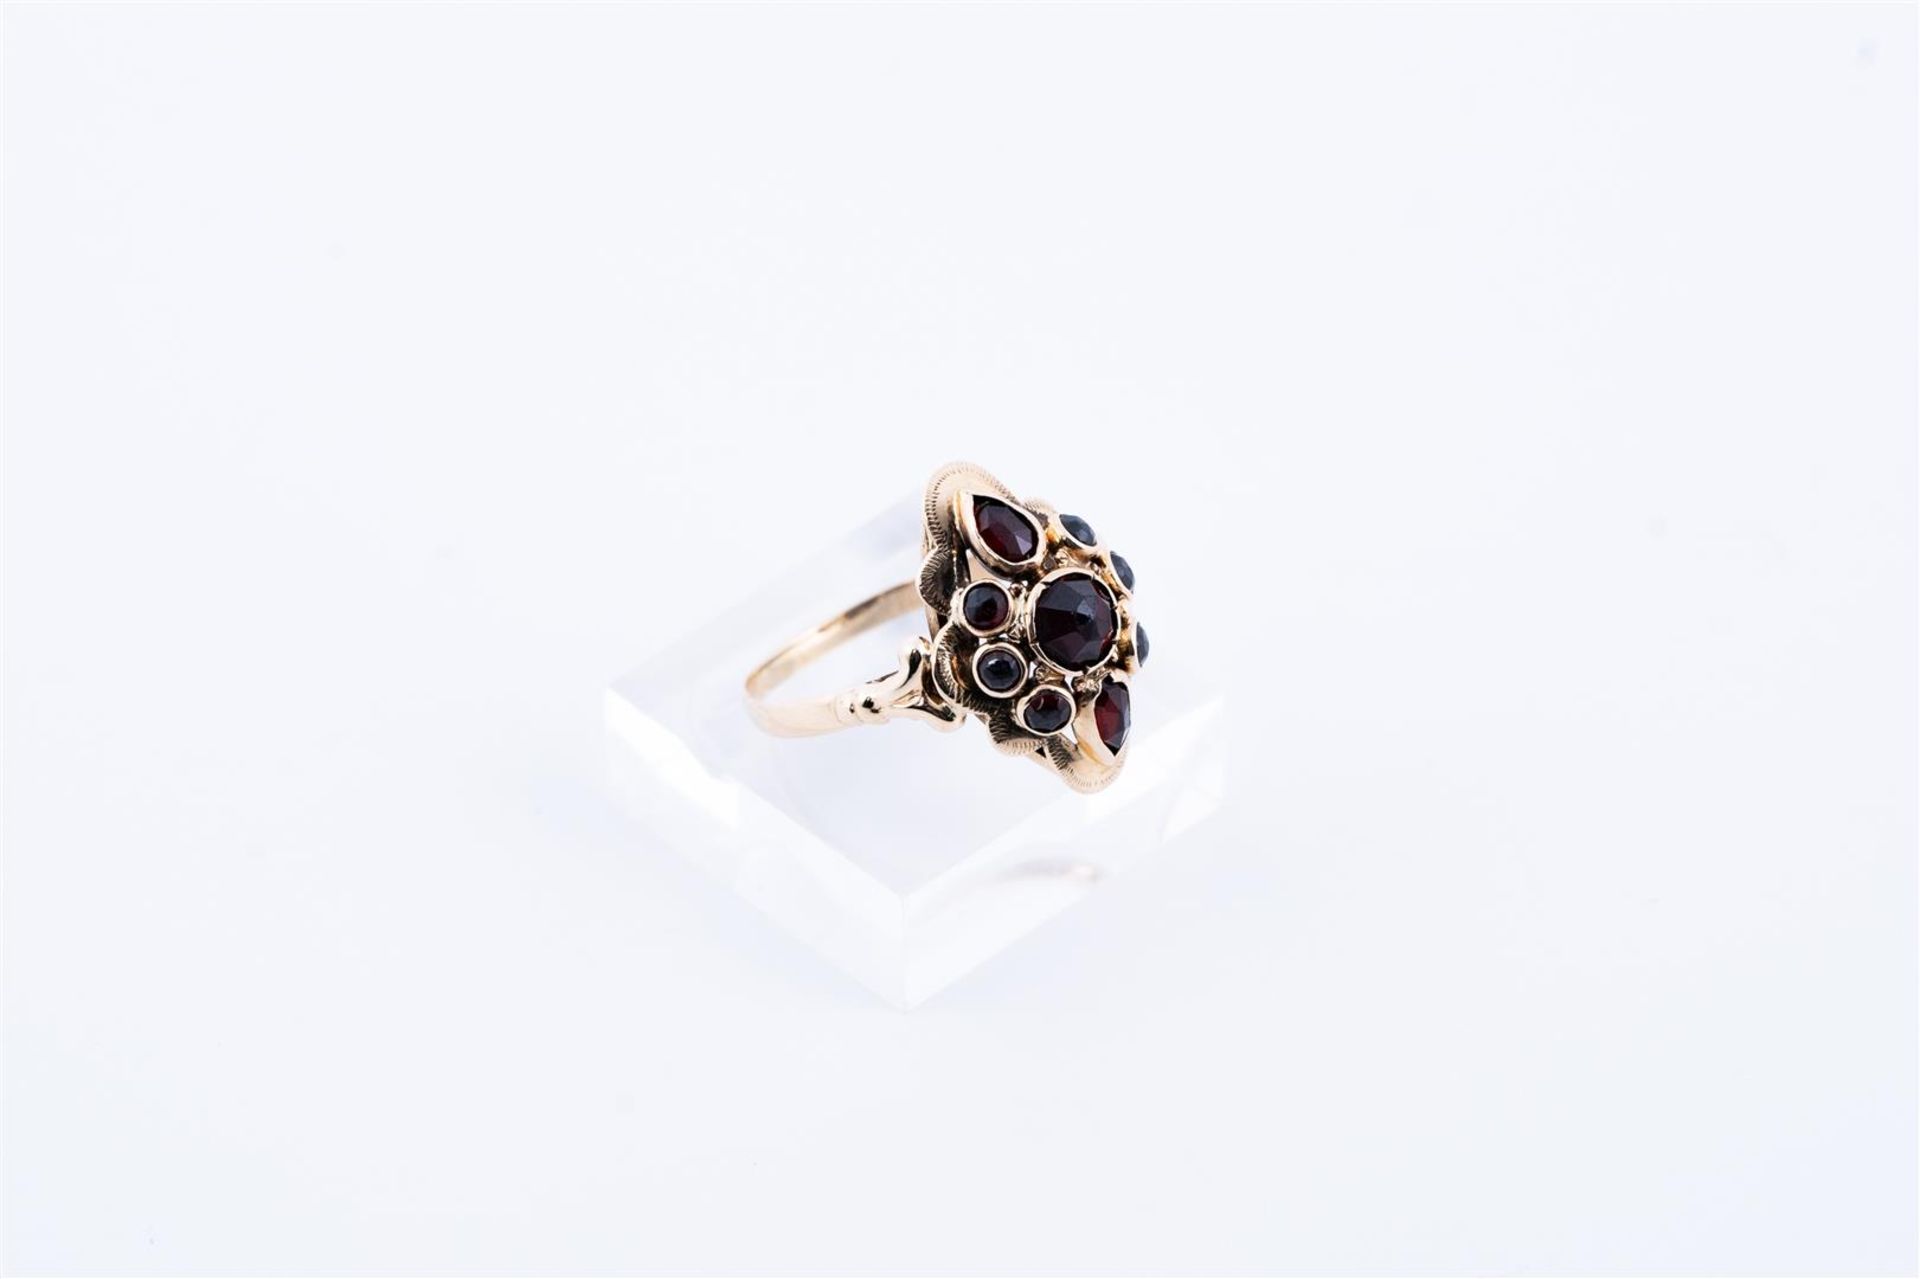 14kt yellow gold marquis ring set with garnet.
The ring is set with 1 rose cut central garnet of app